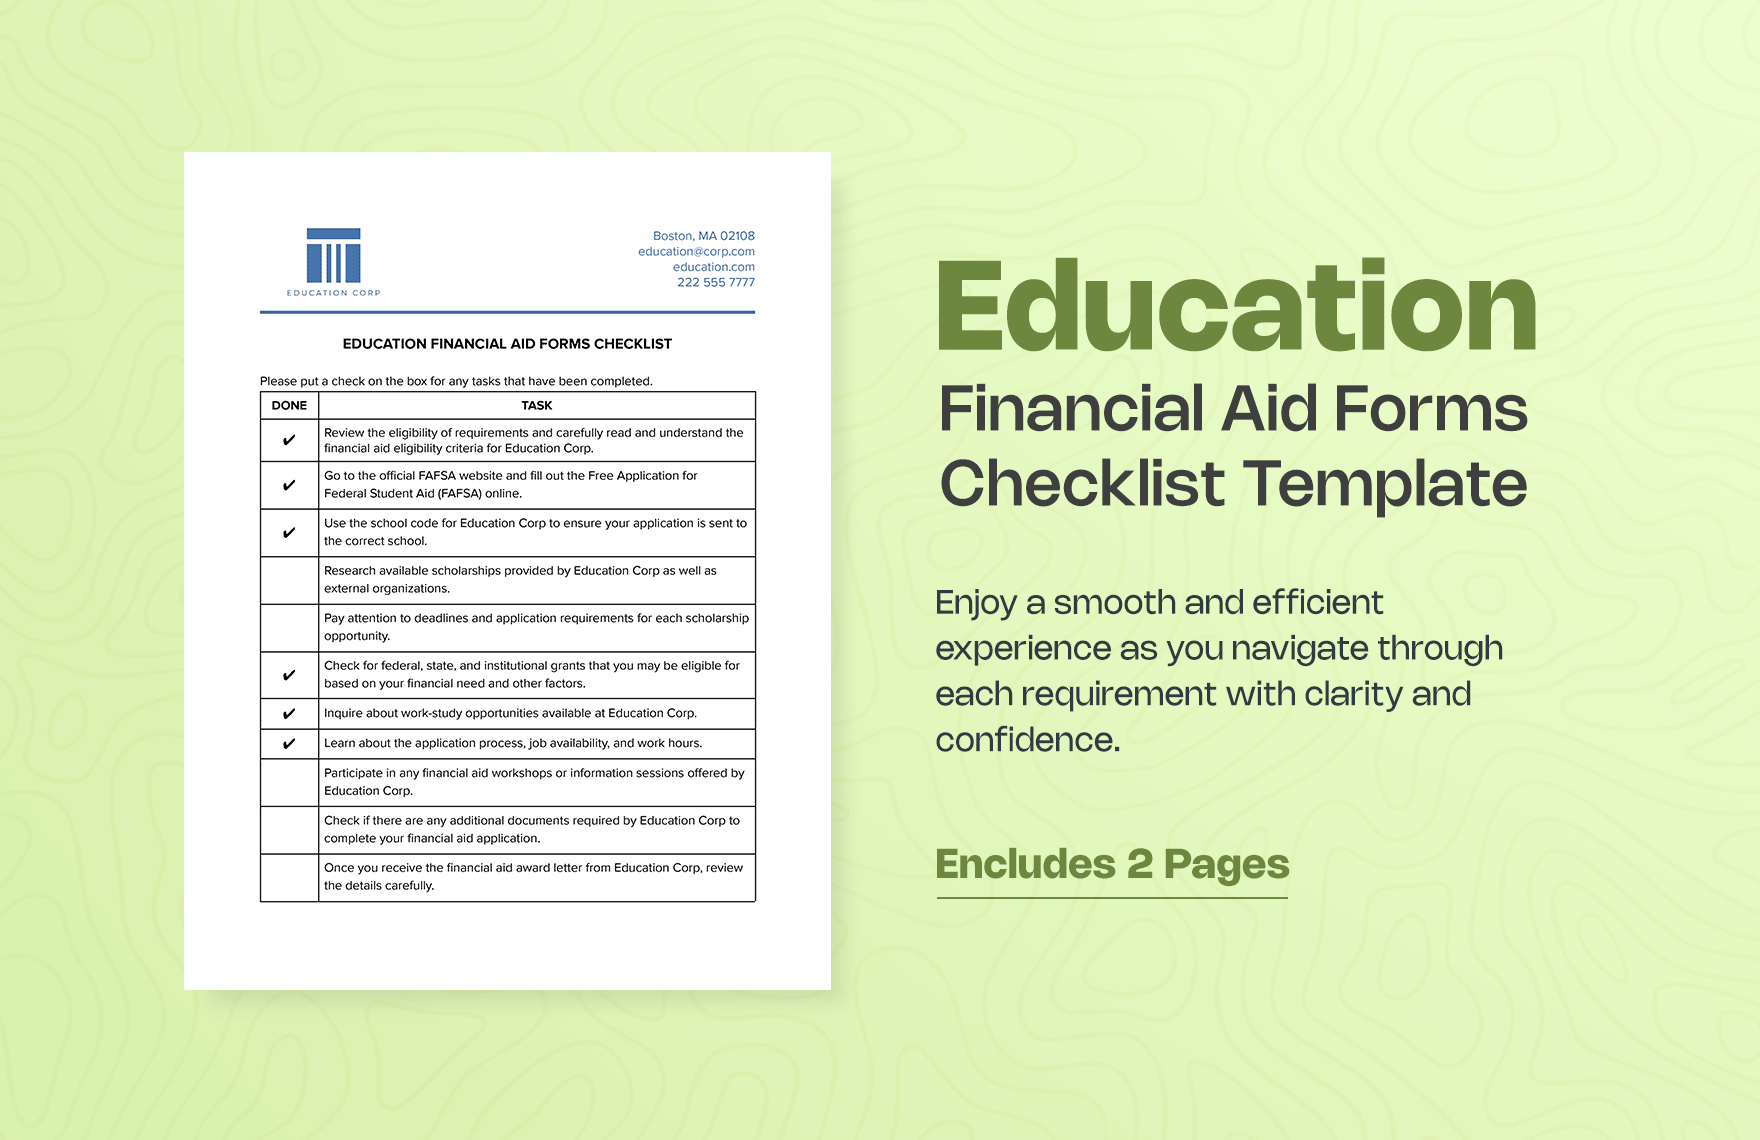 Education Financial Aid Forms Checklist Template